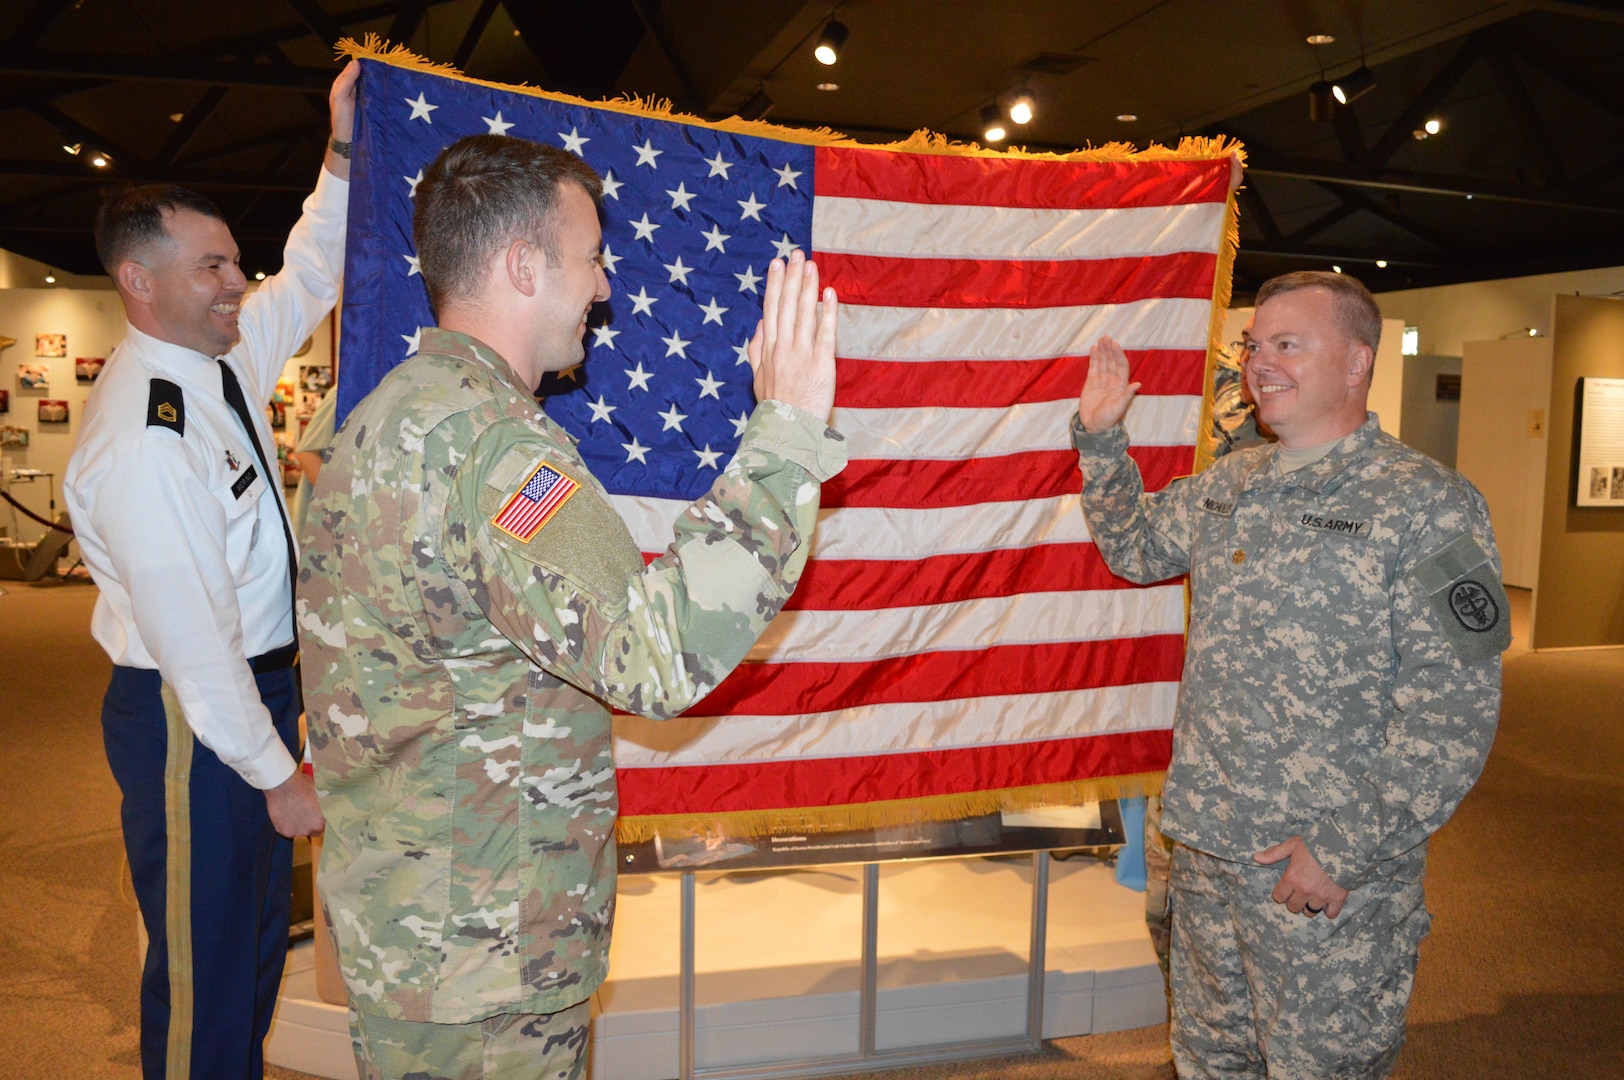 Army 2nd Lt. Marc A. Nicholes (center left), administers the oath of office to swear-in his father, Army Reserve Lt. Col. Andrew “Andy” Nicholes (center right) during a commissioning ceremony July 20 at the U.S. Army Medicine Department Museum on Joint Base San Antonio-Fort Sam Houston.  Holding the U.S. flag is Army Sgt.1st Class Irvin Merino (far left) and Staff Sgt. Joel Ocasio (not shown), both health care recruiters with the Army Medical Recruiting Station Houston.